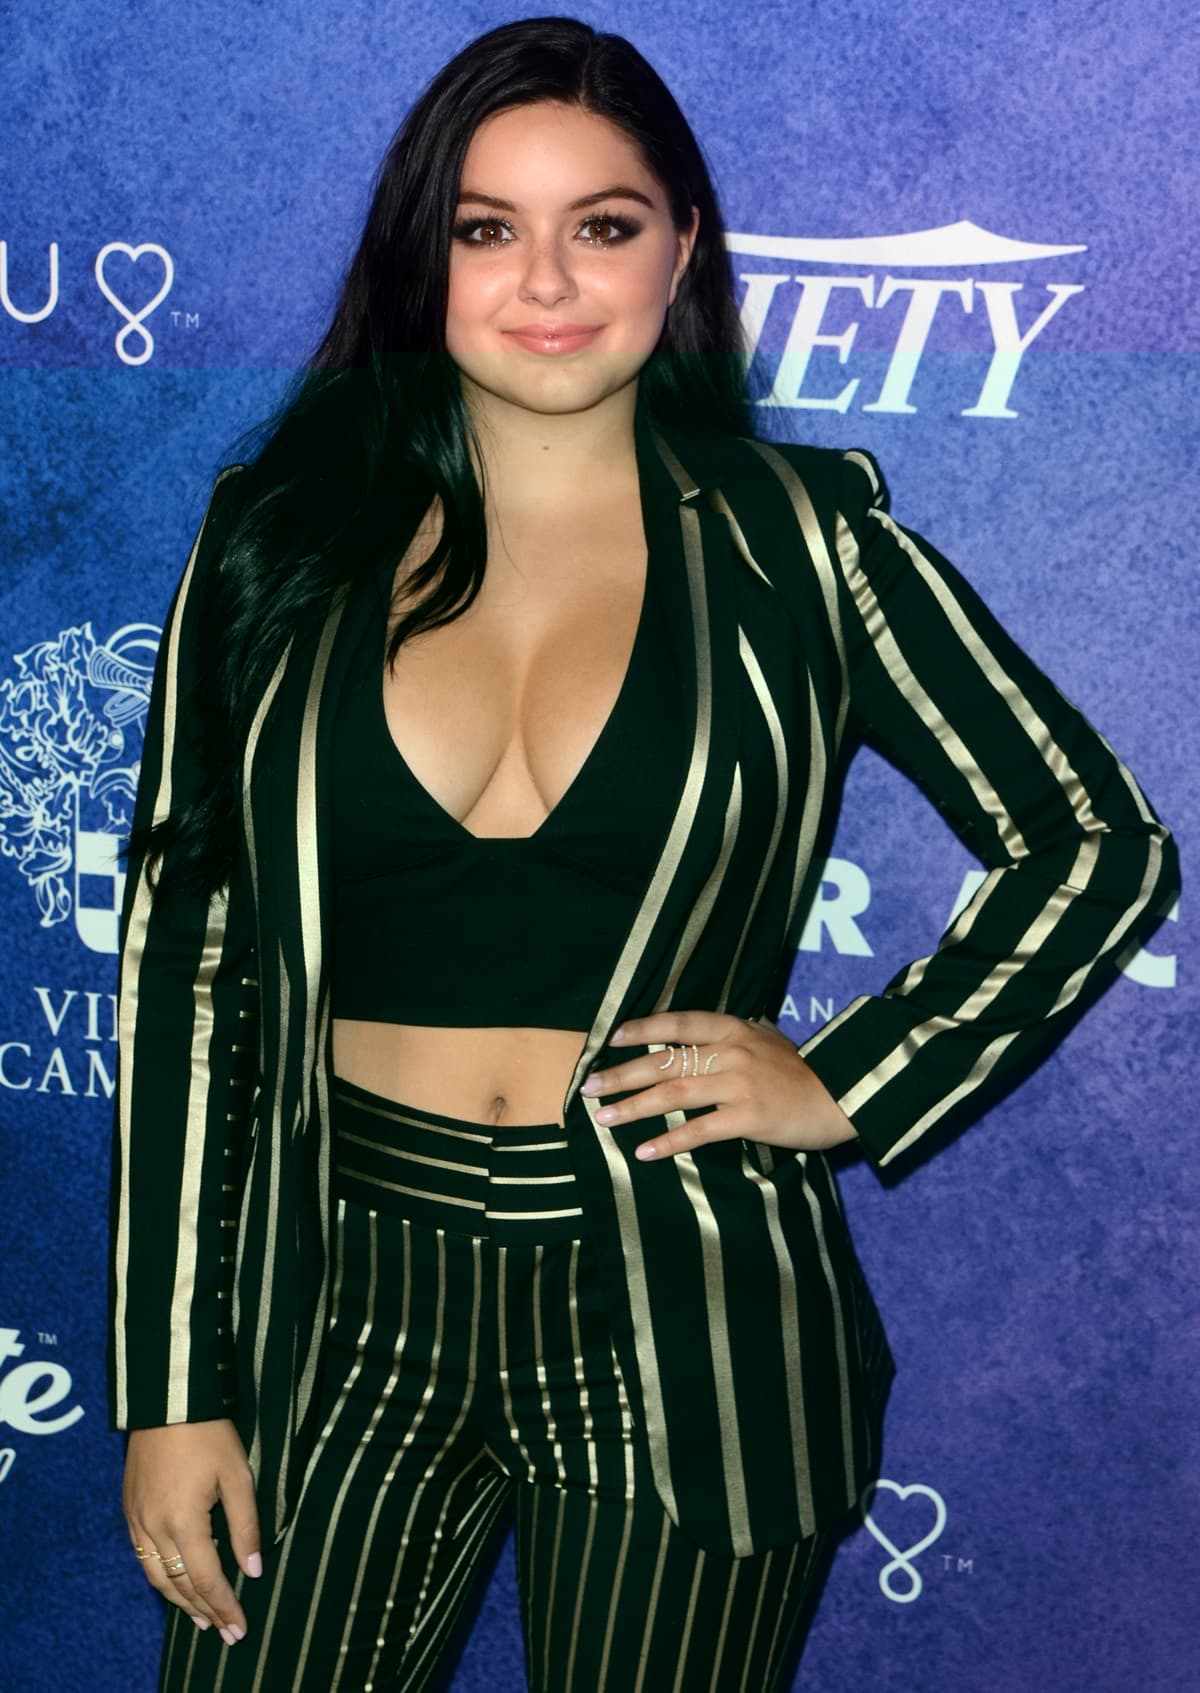 Ariel Winter, known for her revealing Instagram posts, faces both criticism and praise for her outfits, but she insists she shares moments of her life without strategy